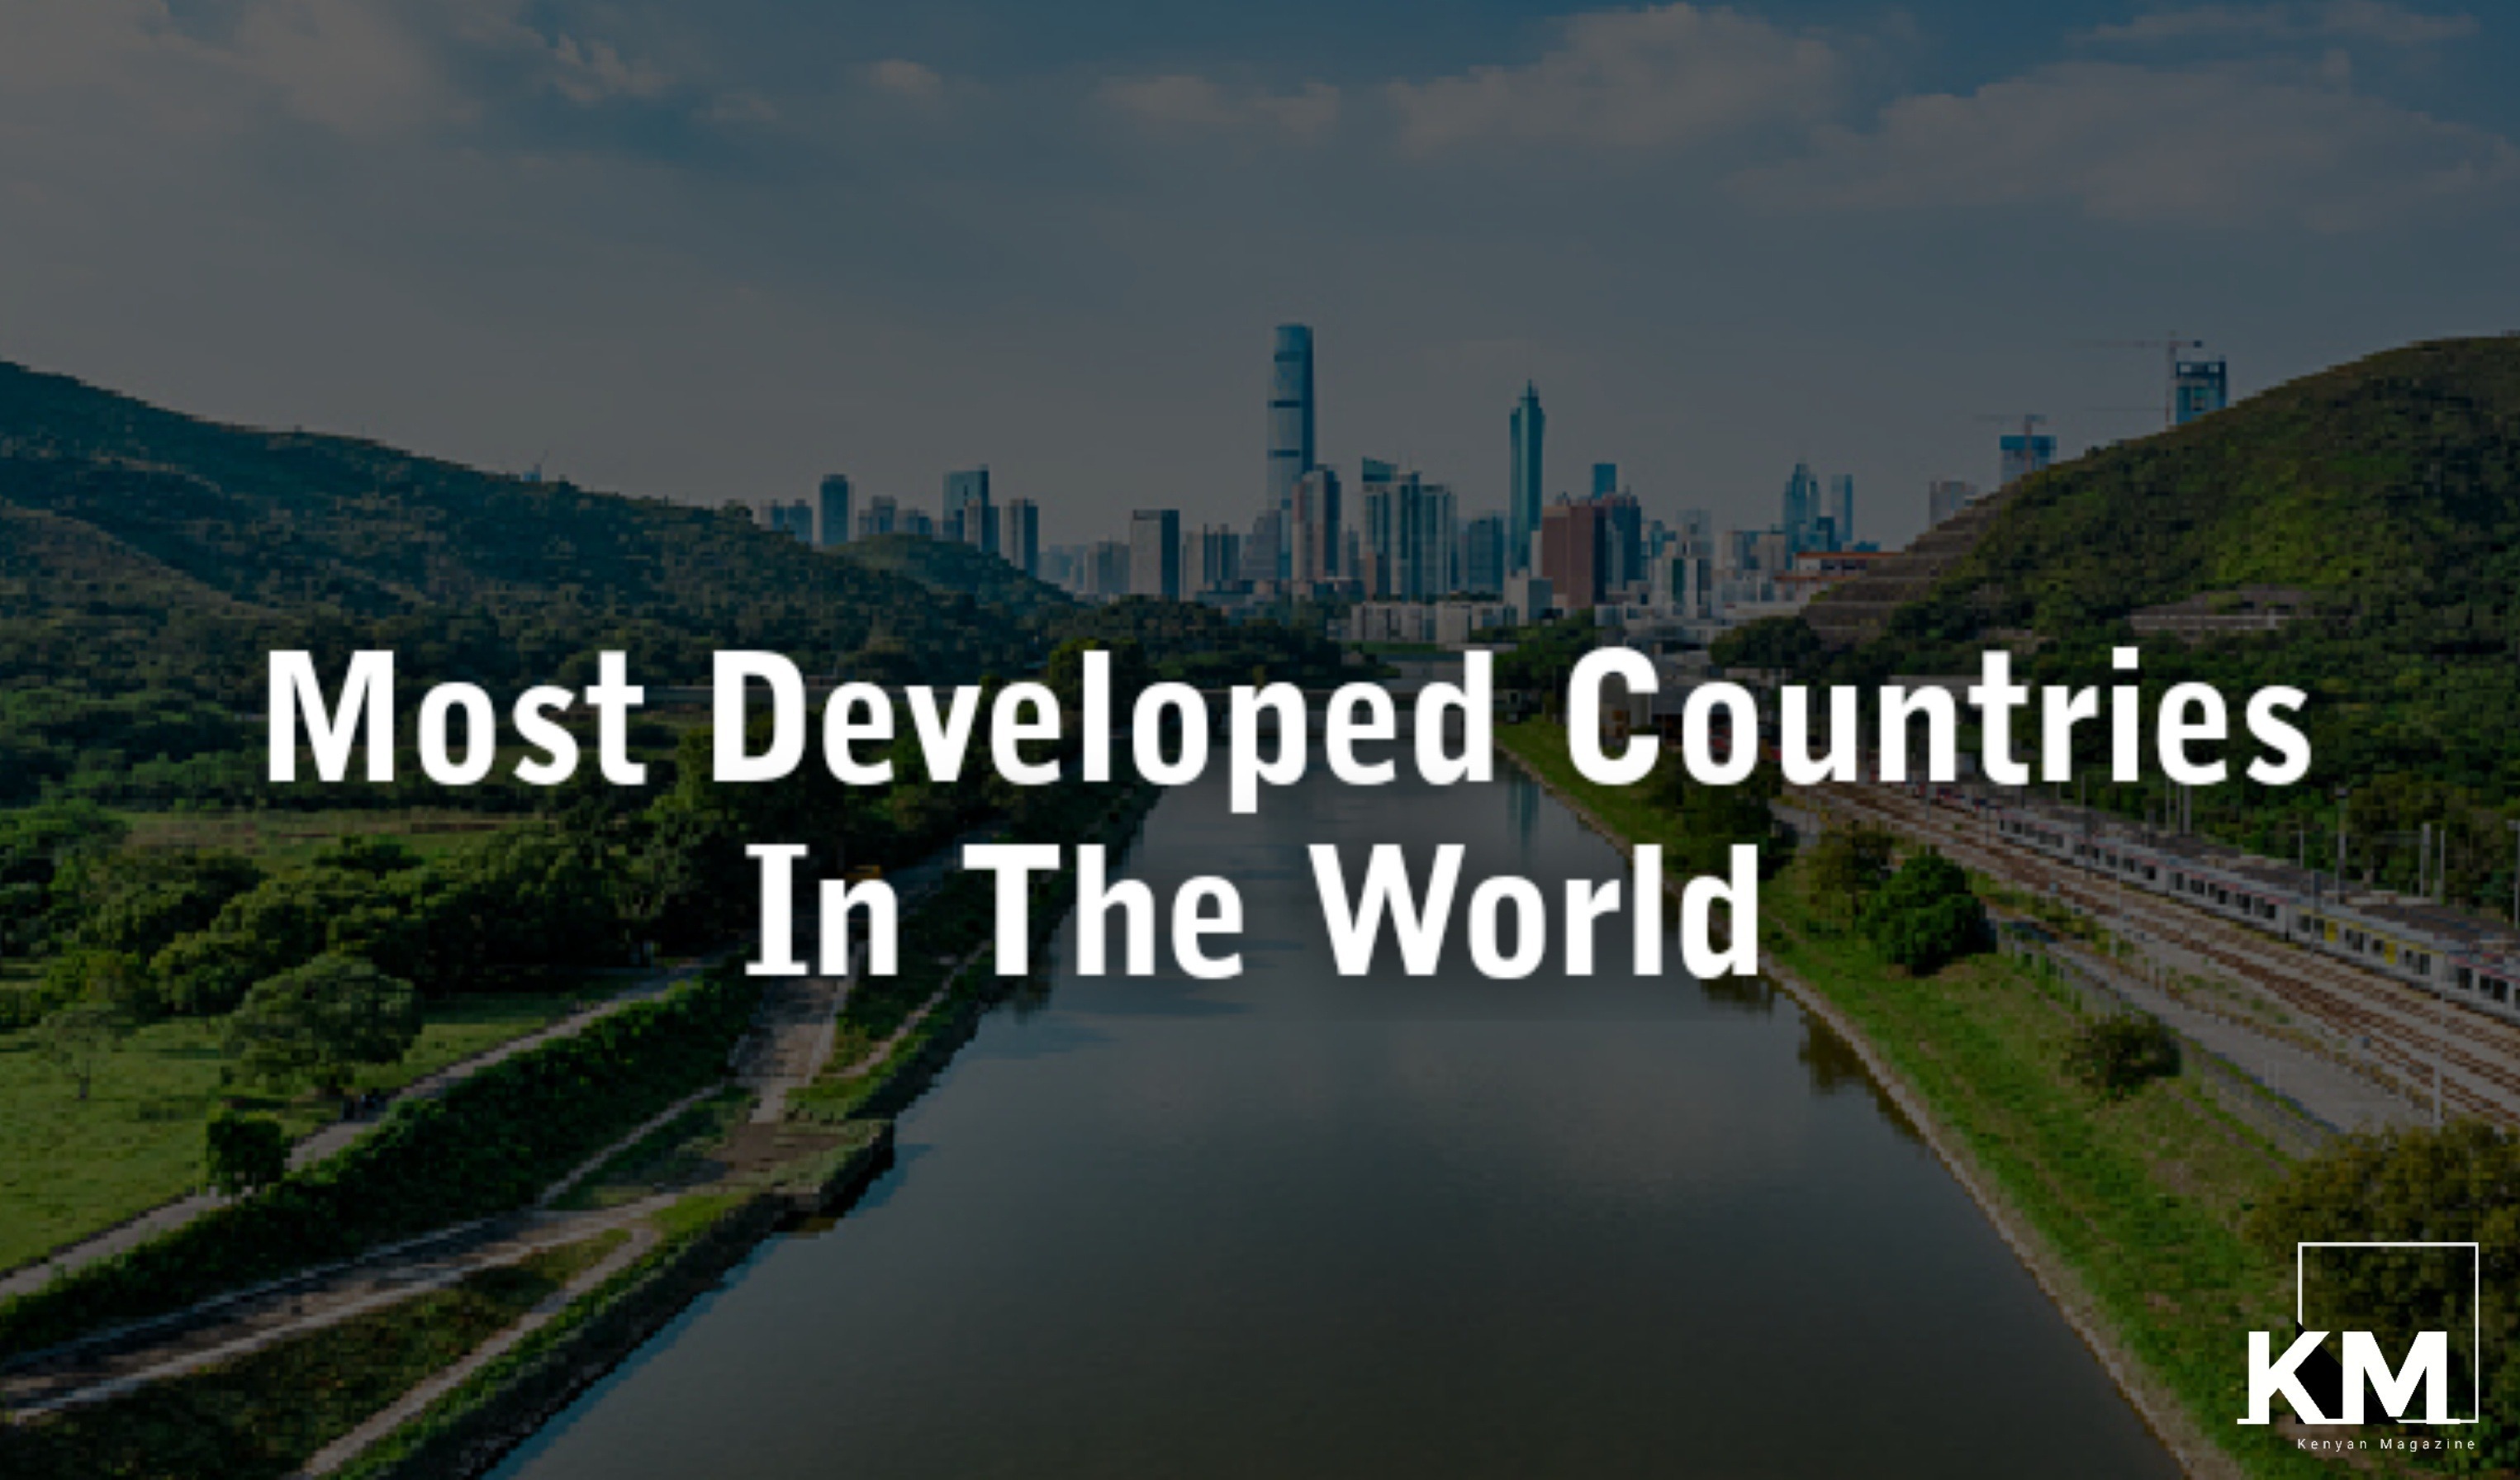 Most developed countries in the world